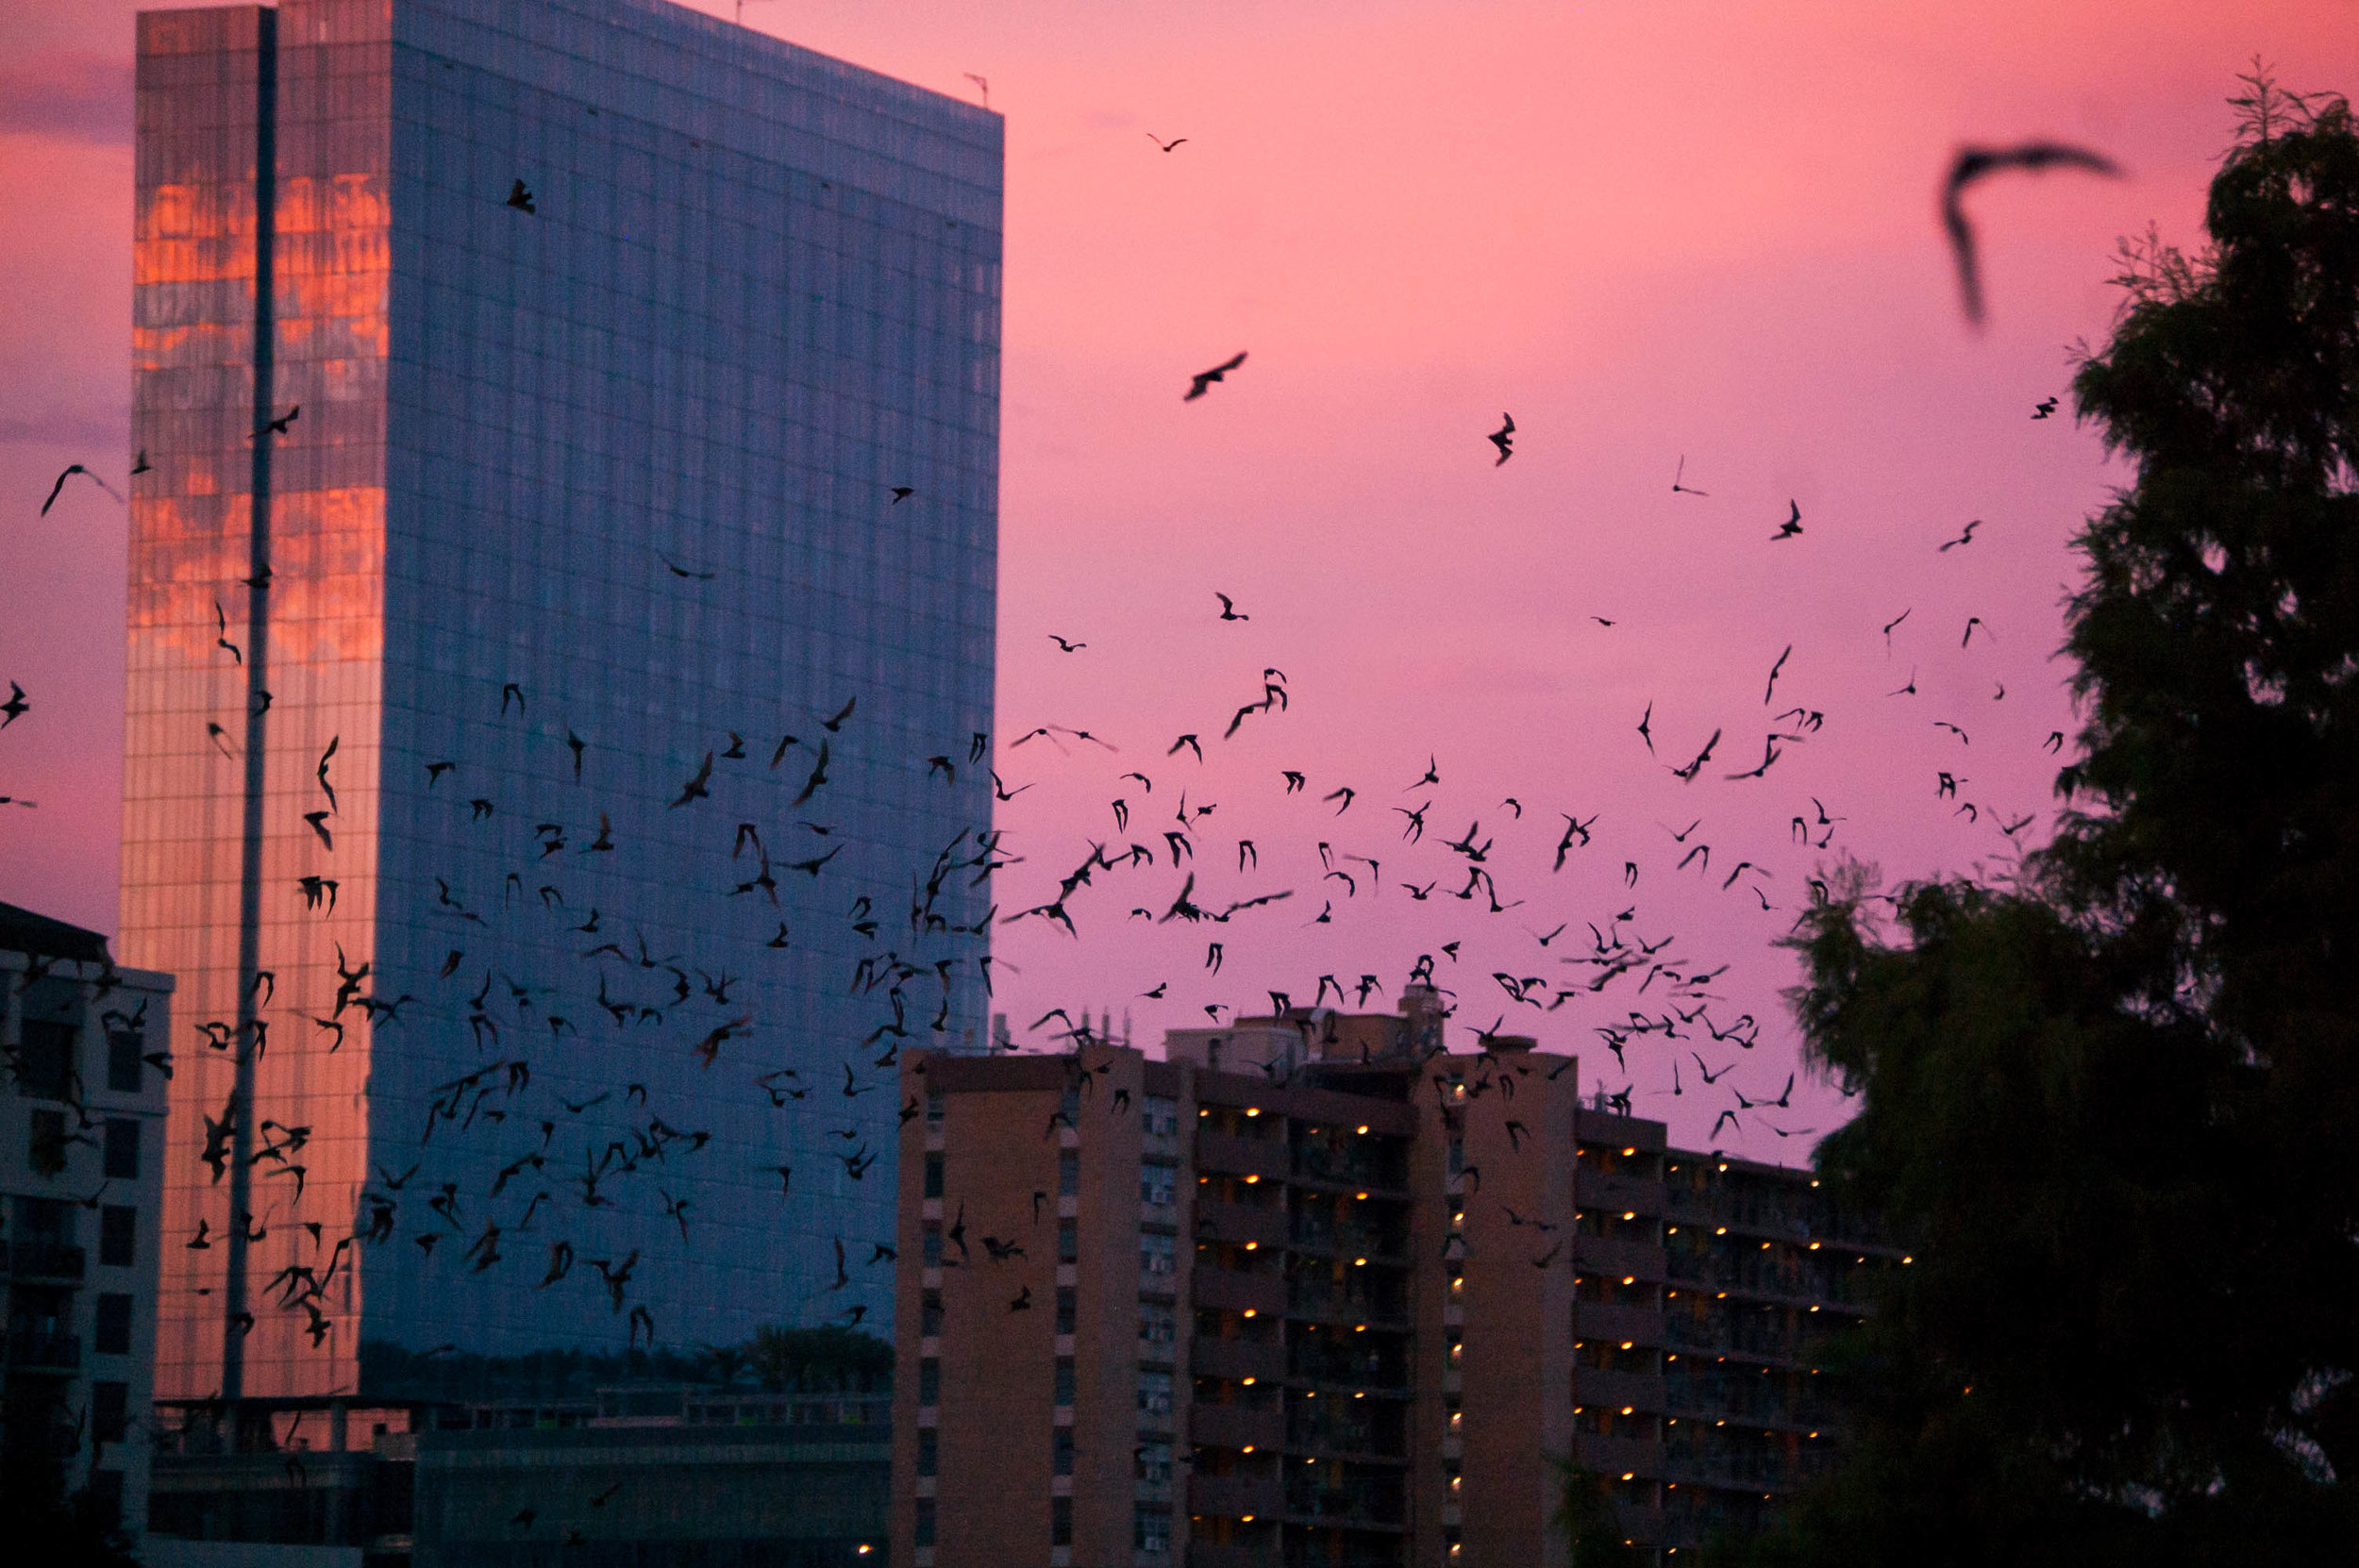  The largest urban bat colony in North America lives under the Ann Richards Congress Avenue Bridge in Austin, Texas.  Every night at sunset from March to November, 1.5 million Mexican free-tailed bats fly out for their nightly hunt.  The form clouds 